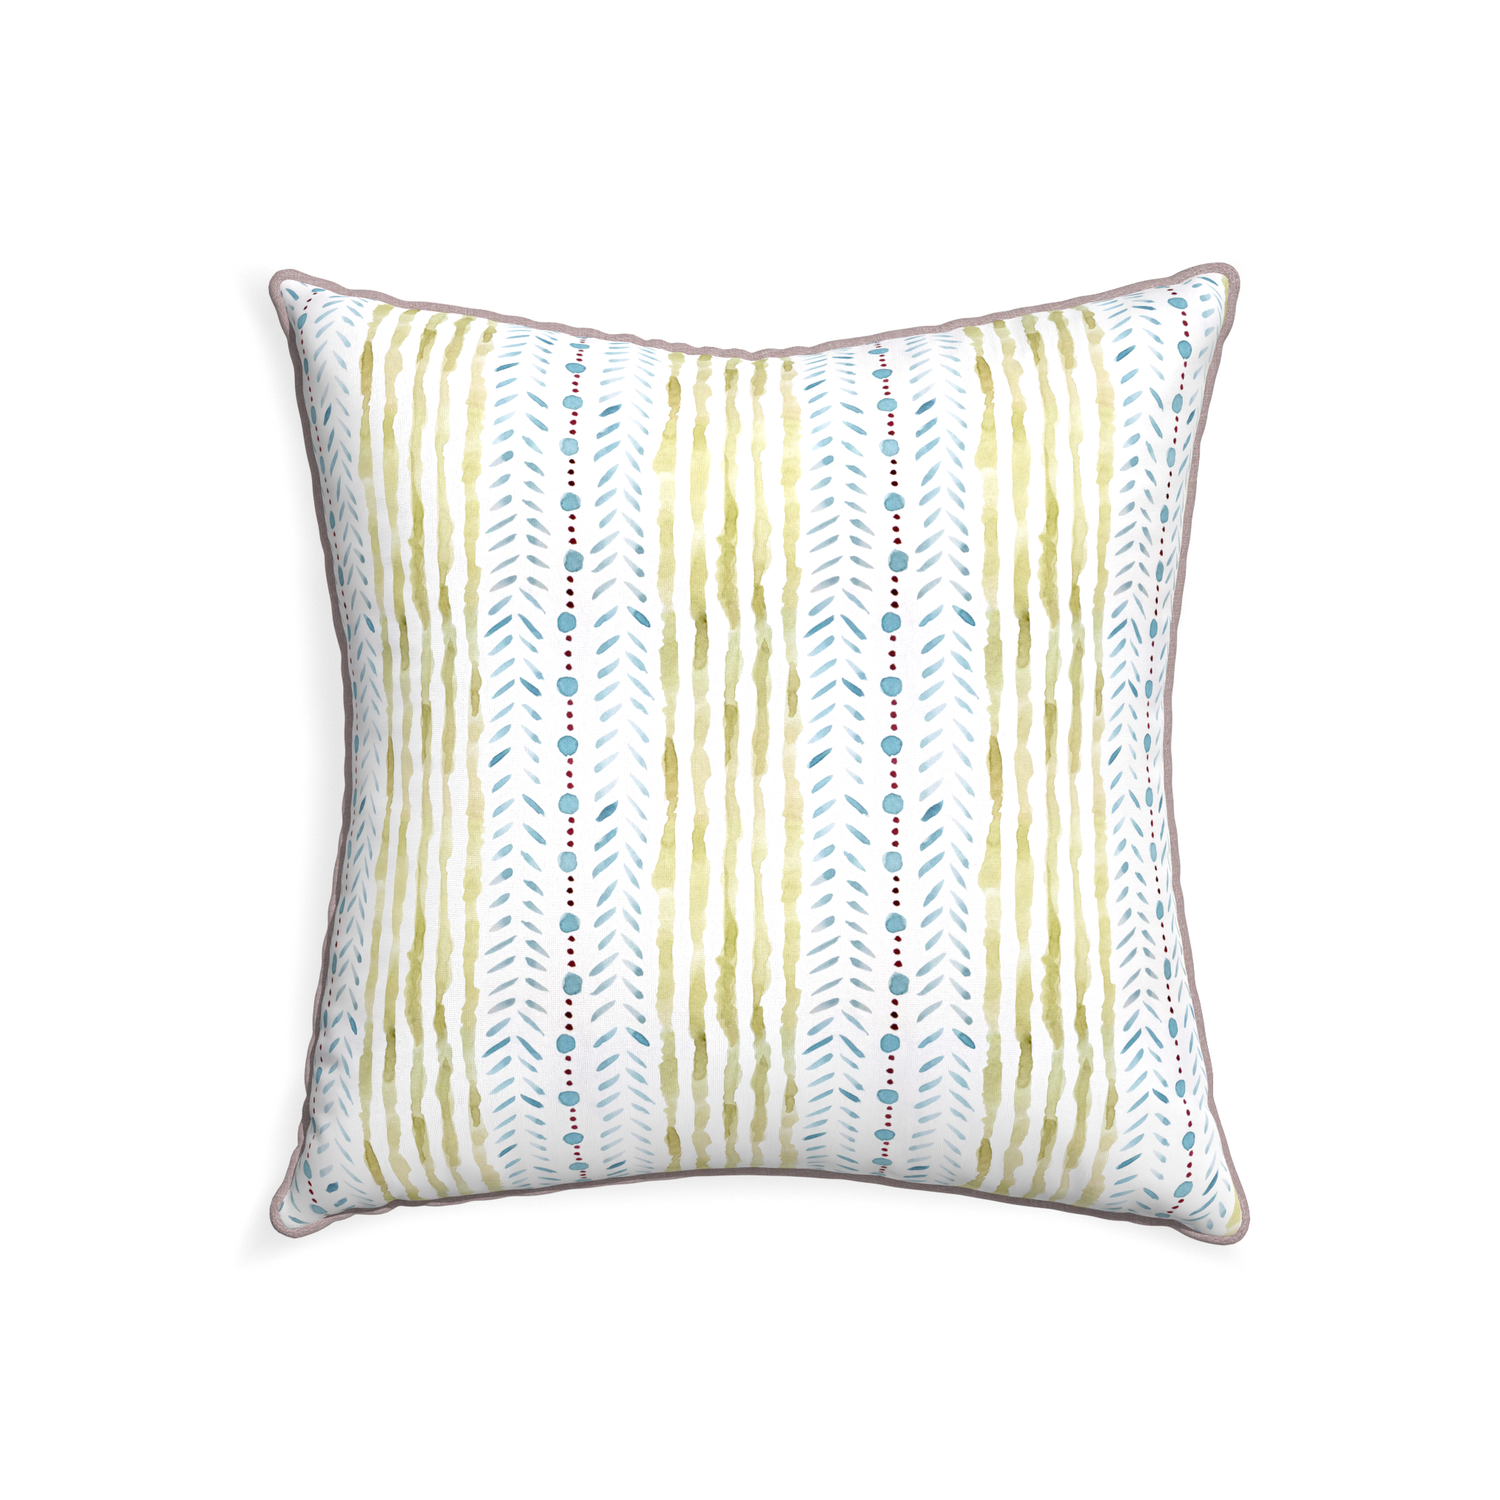 22-square julia custom blue & green stripedpillow with orchid piping on white background